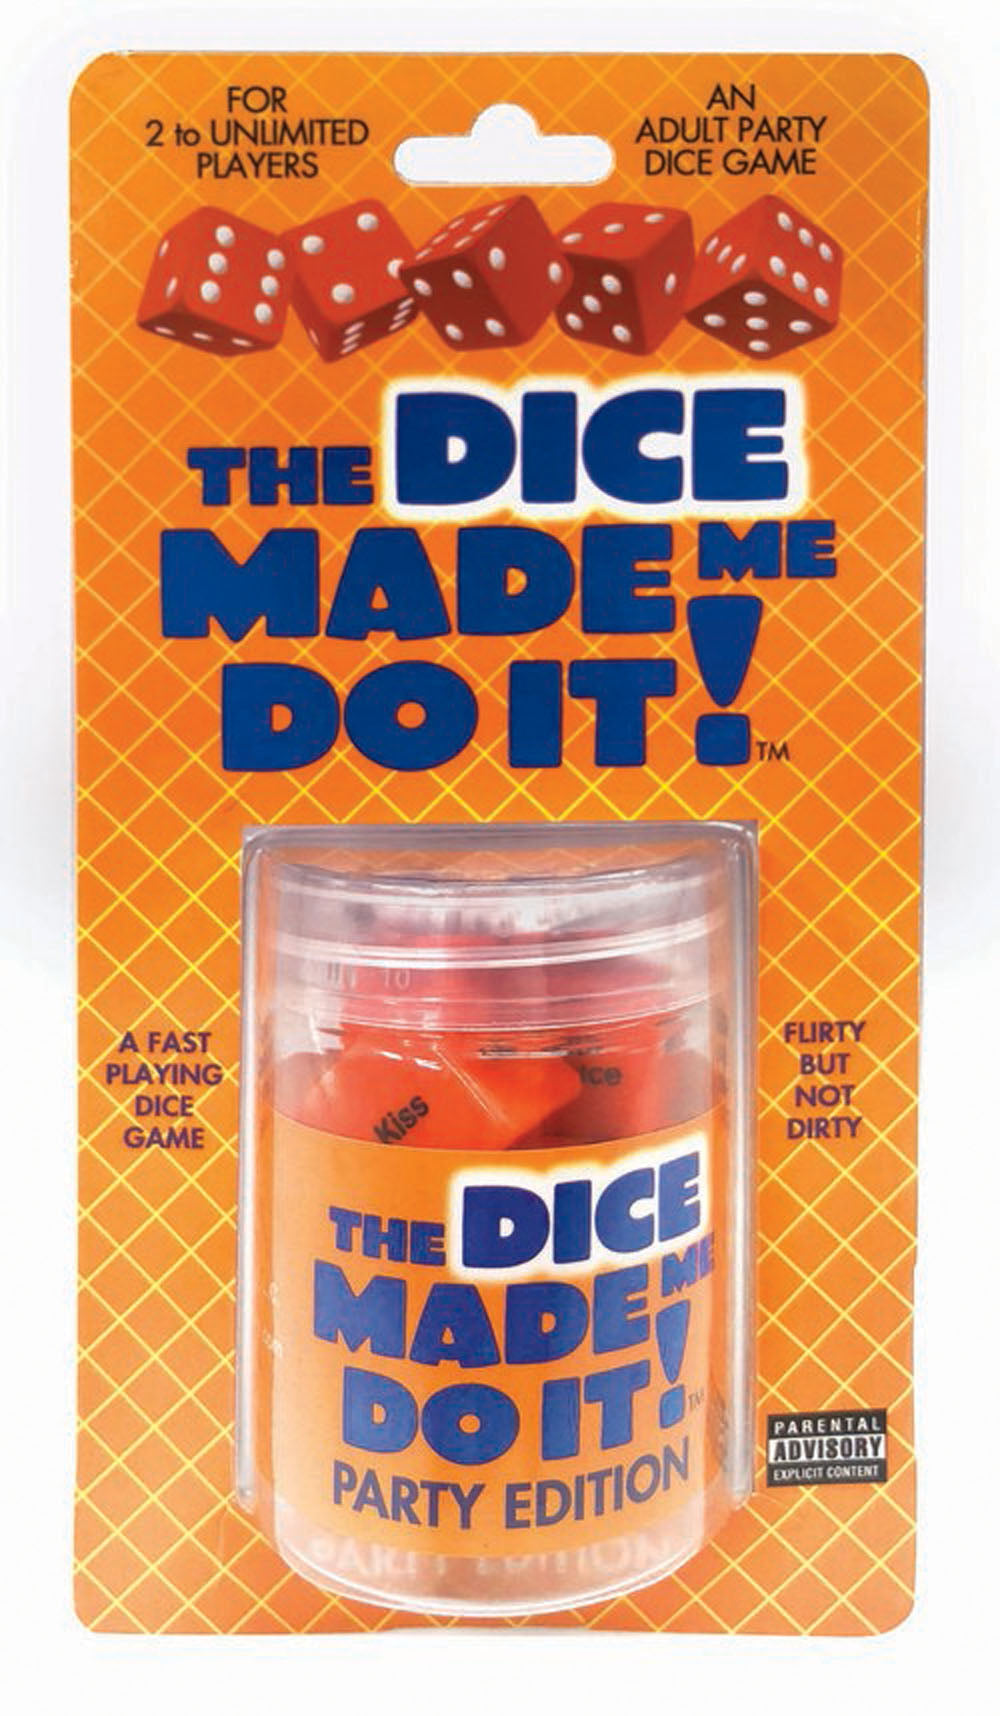 The Dice Made Me Do It - Party Edition